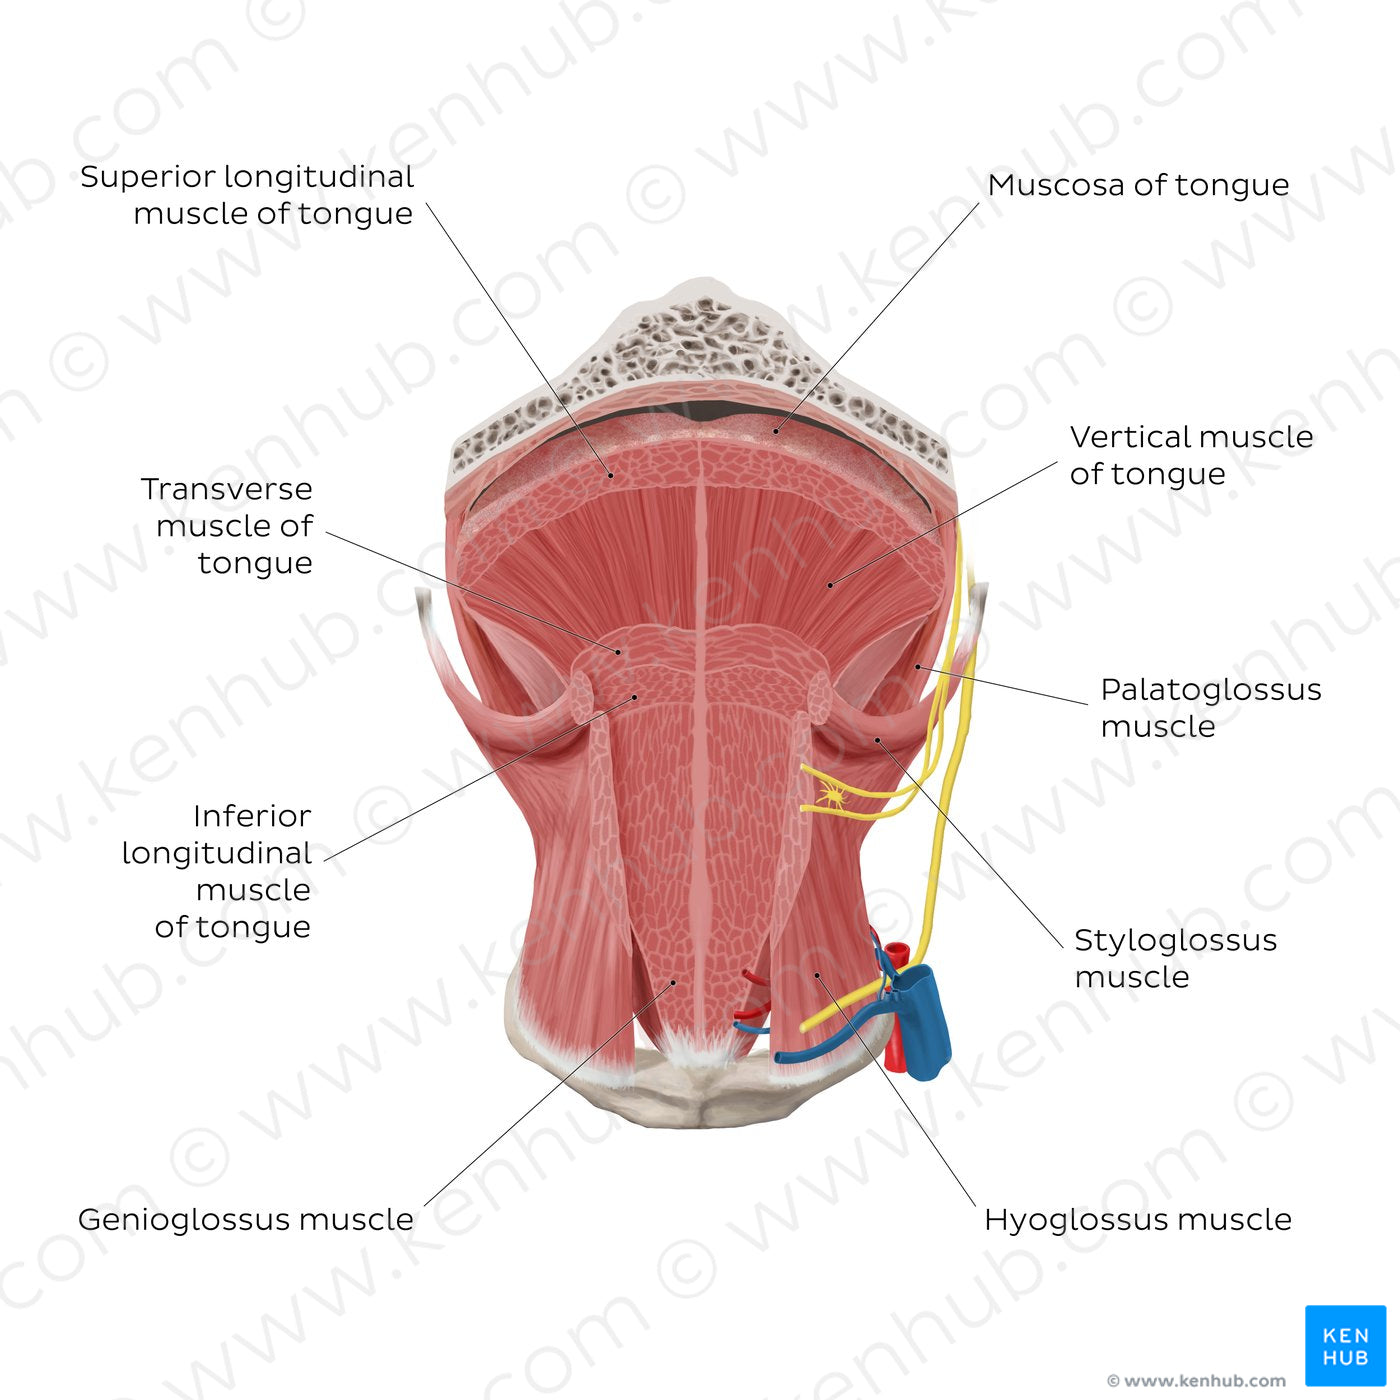 Muscles of the tongue: coronal section (English)